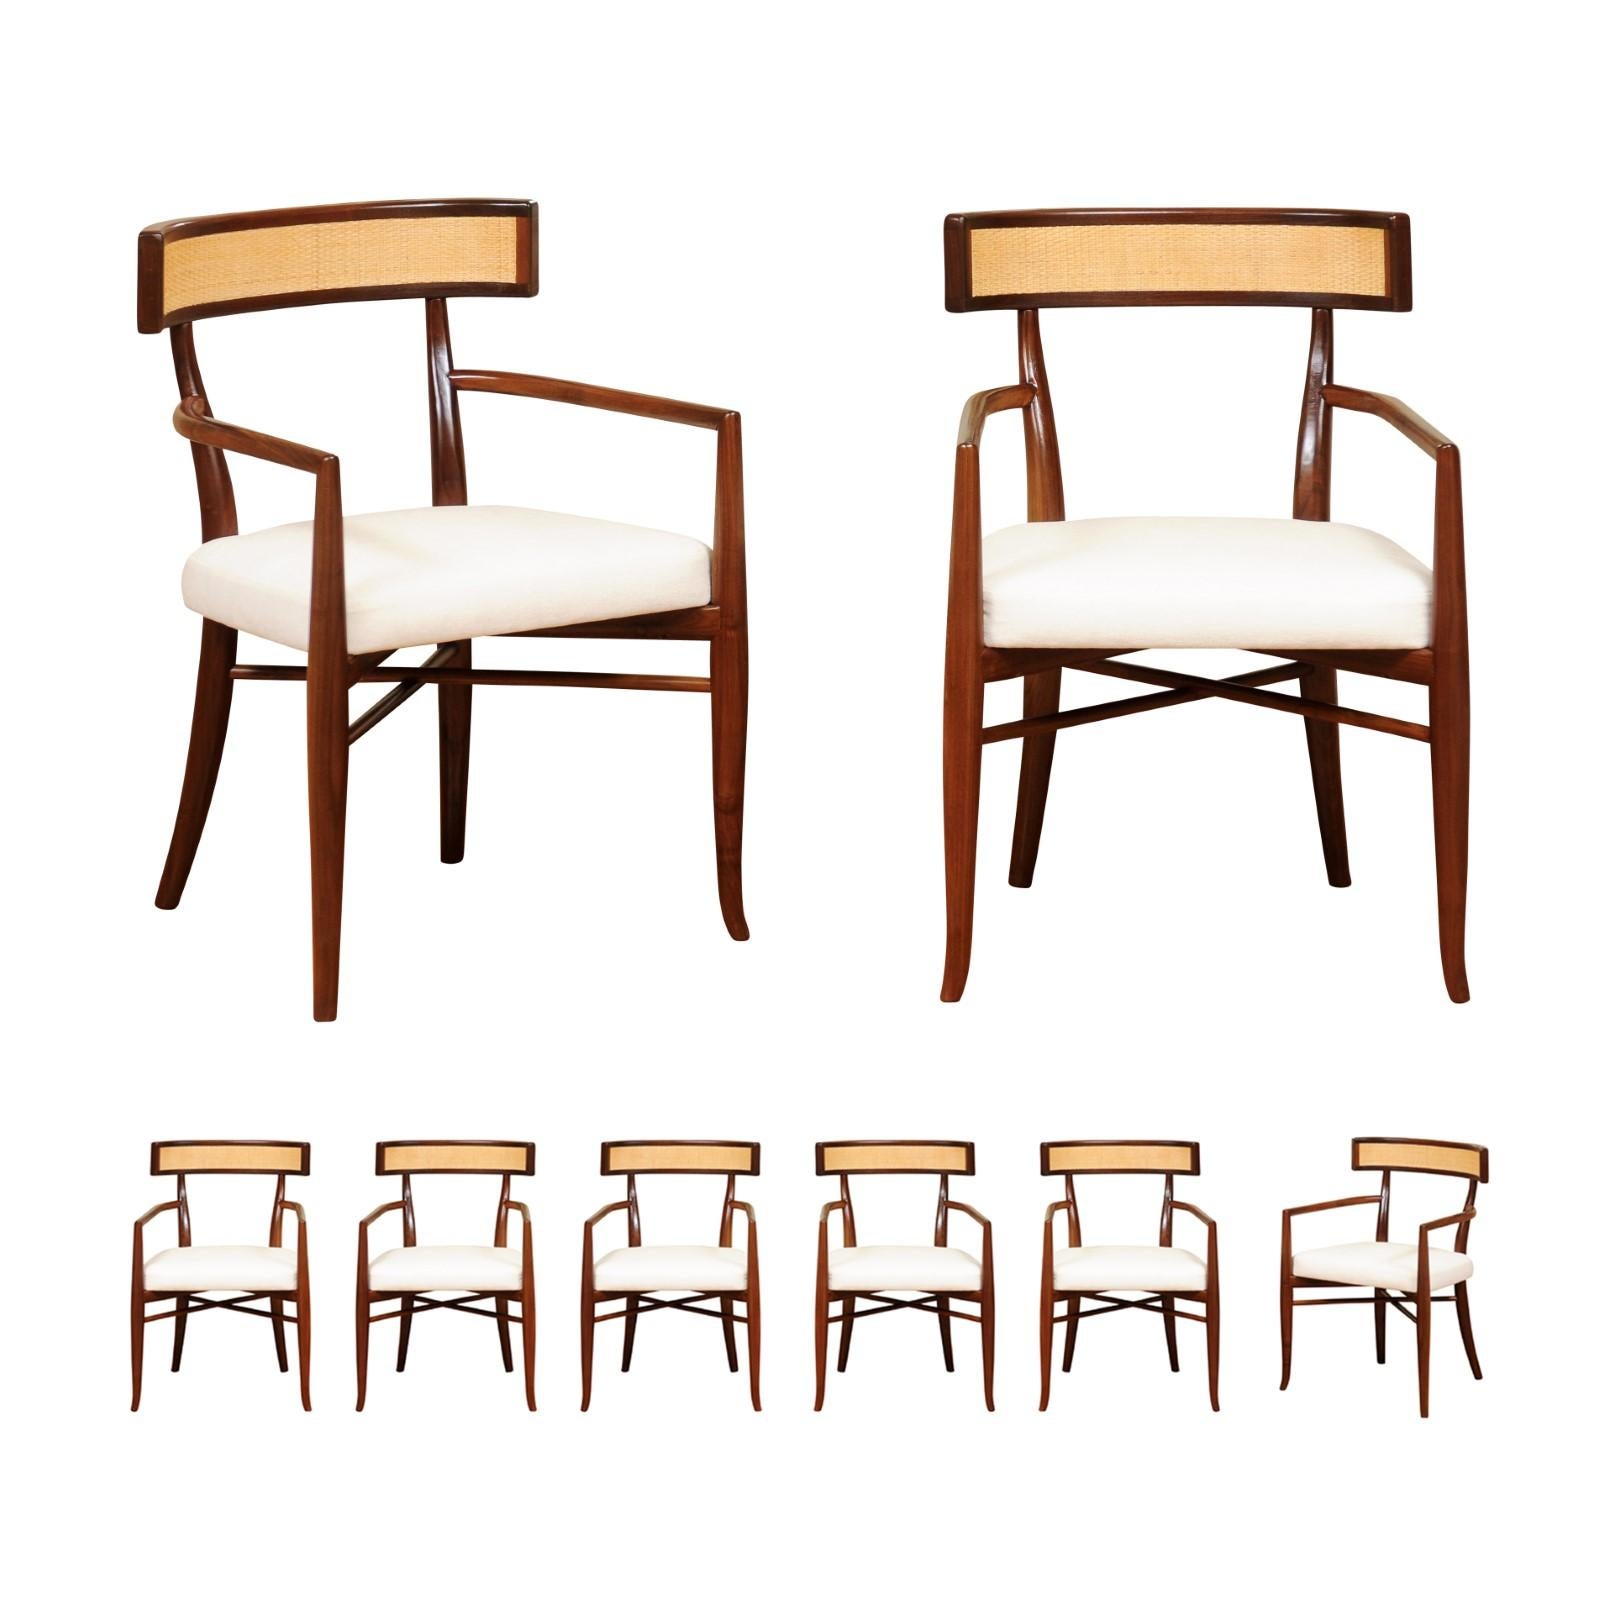 This magnificent set of dining chairs is shipped as professionally photographed and described in the listing narrative: Meticulously professionally restored, newly upholstered and completely installation ready. The custom cane back is a modification